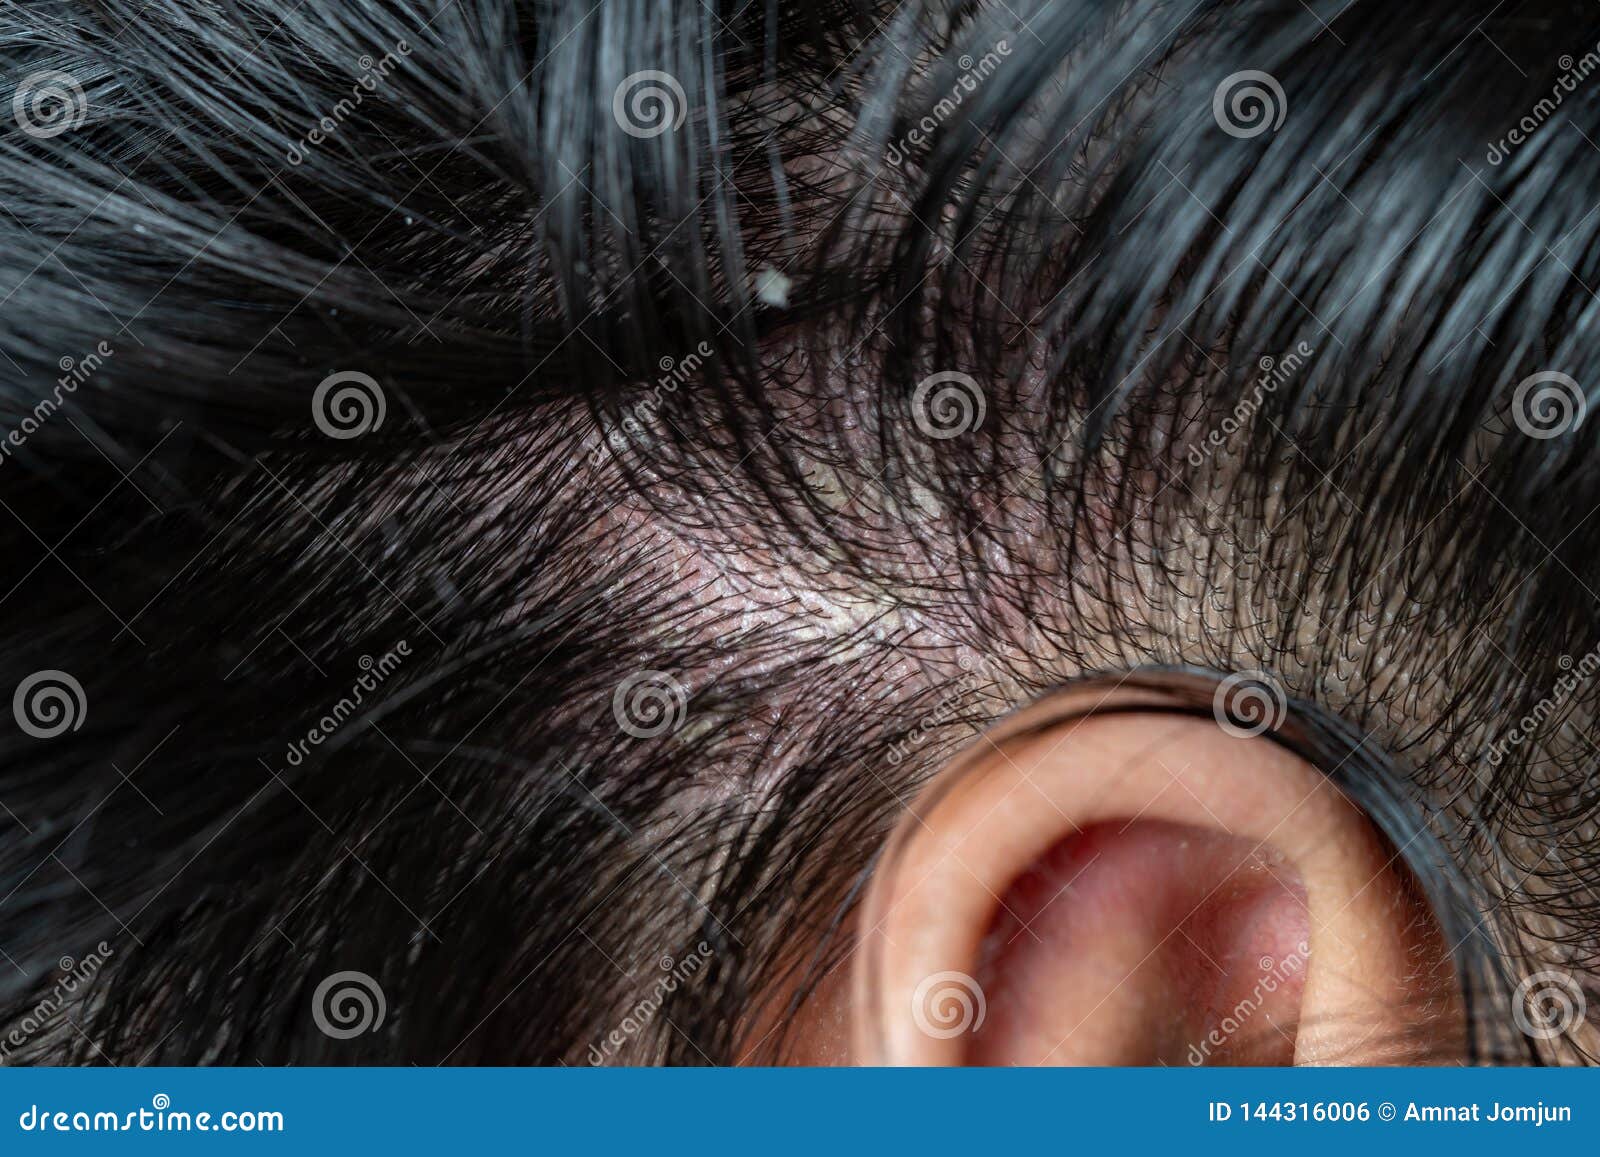 Skin Diseases, on the Scalp Stock Photo - Image of dandruff, itch ...